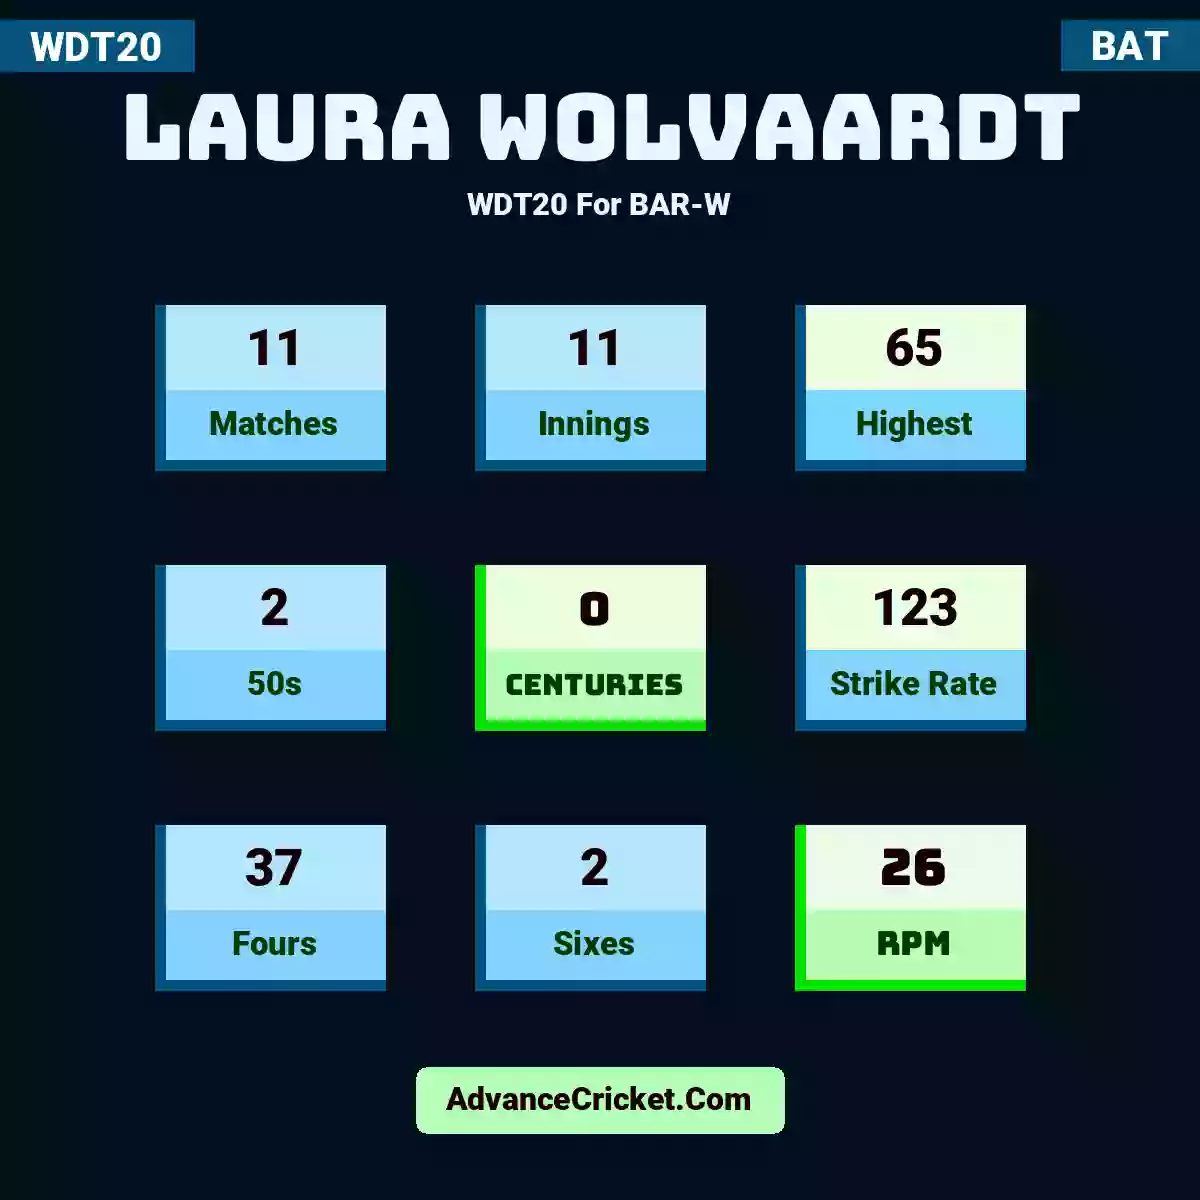 Laura Wolvaardt WDT20  For BAR-W, Laura Wolvaardt played 11 matches, scored 65 runs as highest, 2 half-centuries, and 0 centuries, with a strike rate of 123. L.Wolvaardt hit 37 fours and 2 sixes, with an RPM of 26.